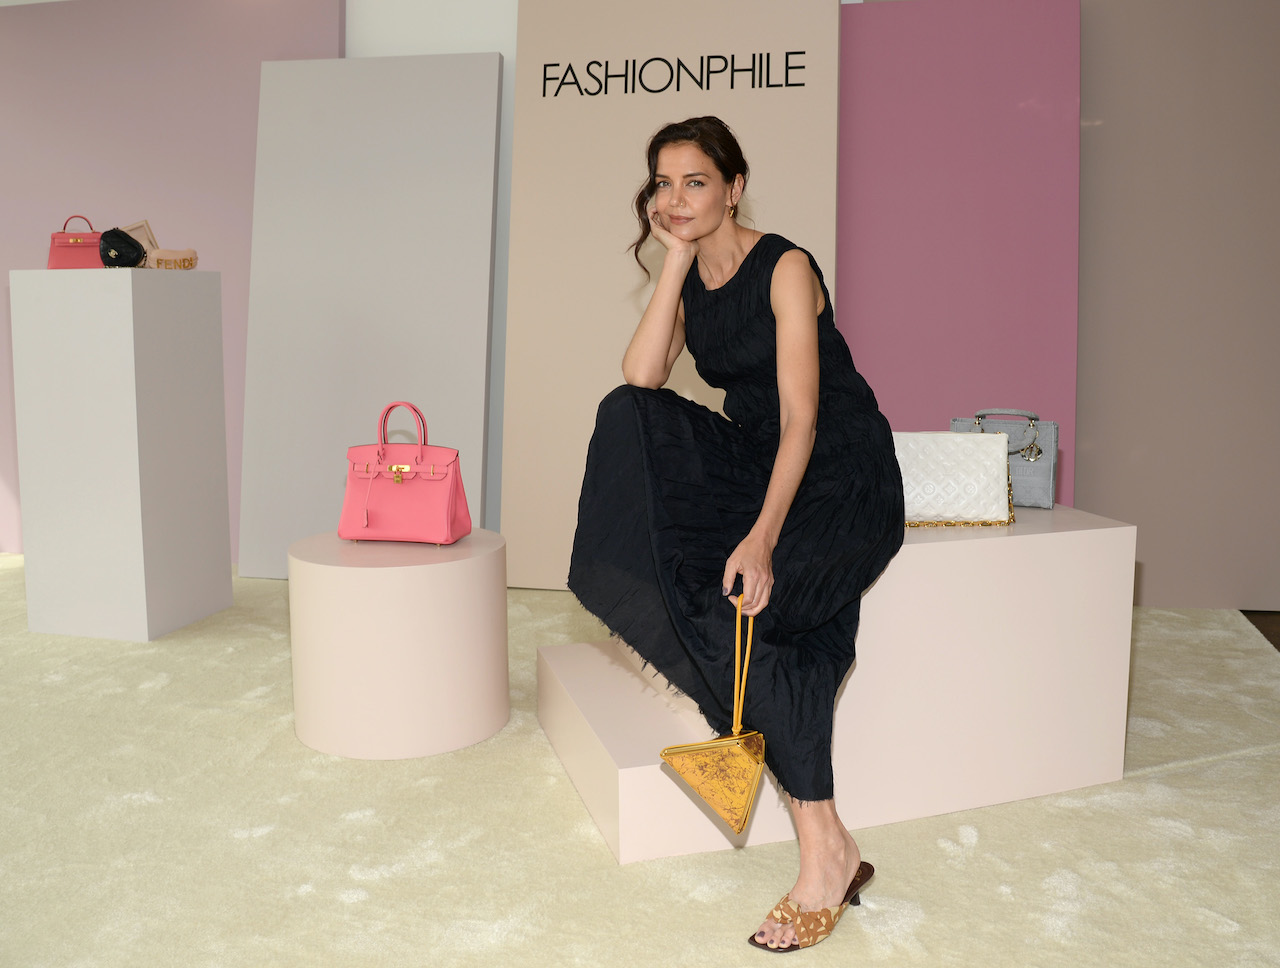 FASHIONPHILE OPENS 60,000-SQUARE-FOOT AUTHENTICATION CENTER & SHOWROOM IN  NEW YORK CITY